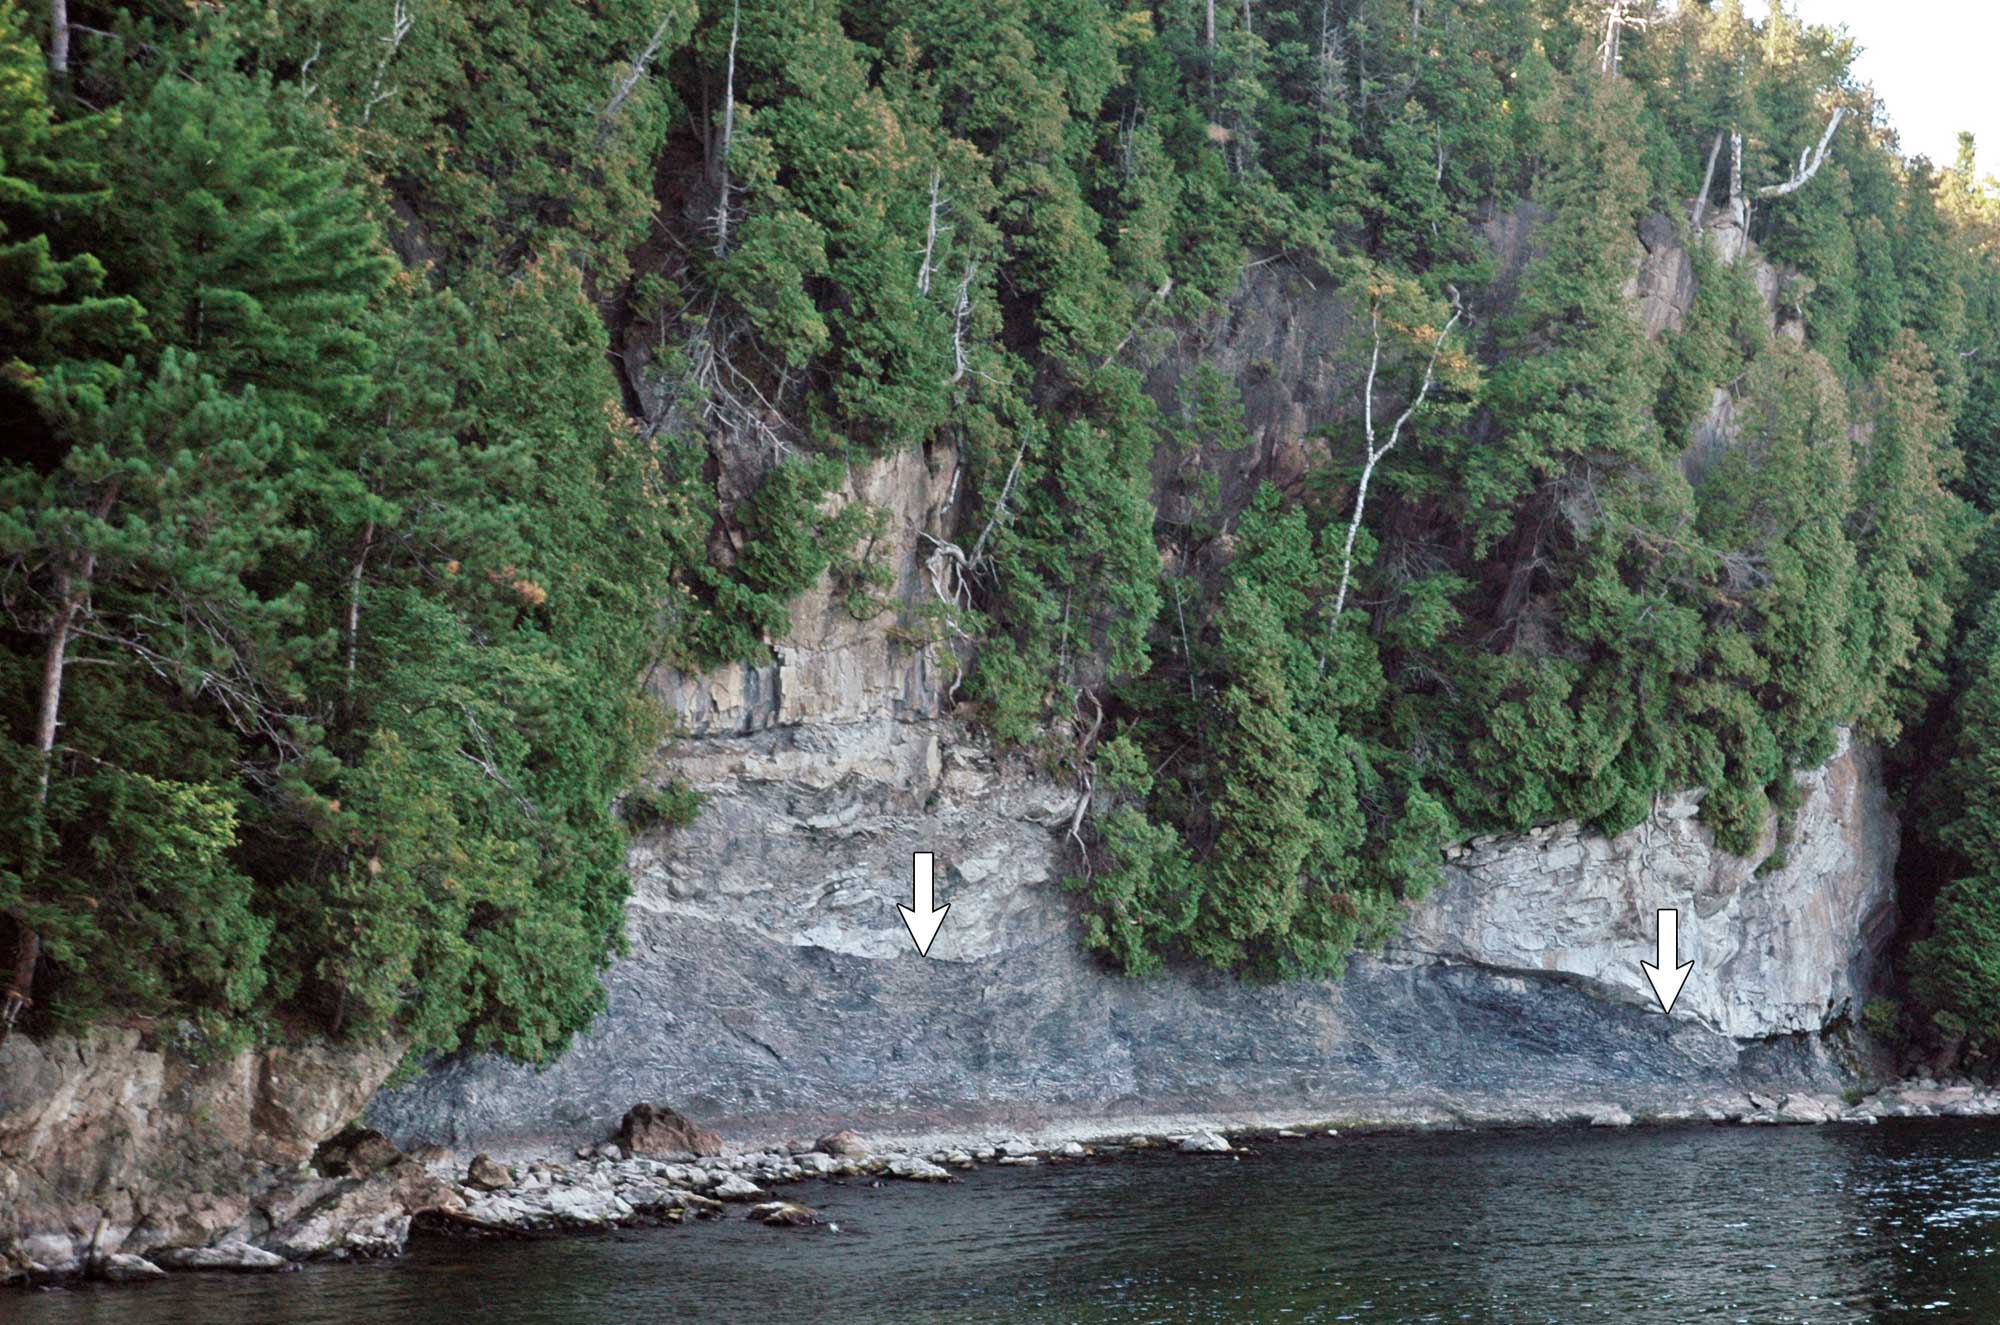 Photograph of the Champlain Thrust Fault in Vermont. The photo shows a rock face along a shoreline, with conifers growing above. The rock consists of a light gray layer above a dark gray layer. Two arrows point at the position of the fault.